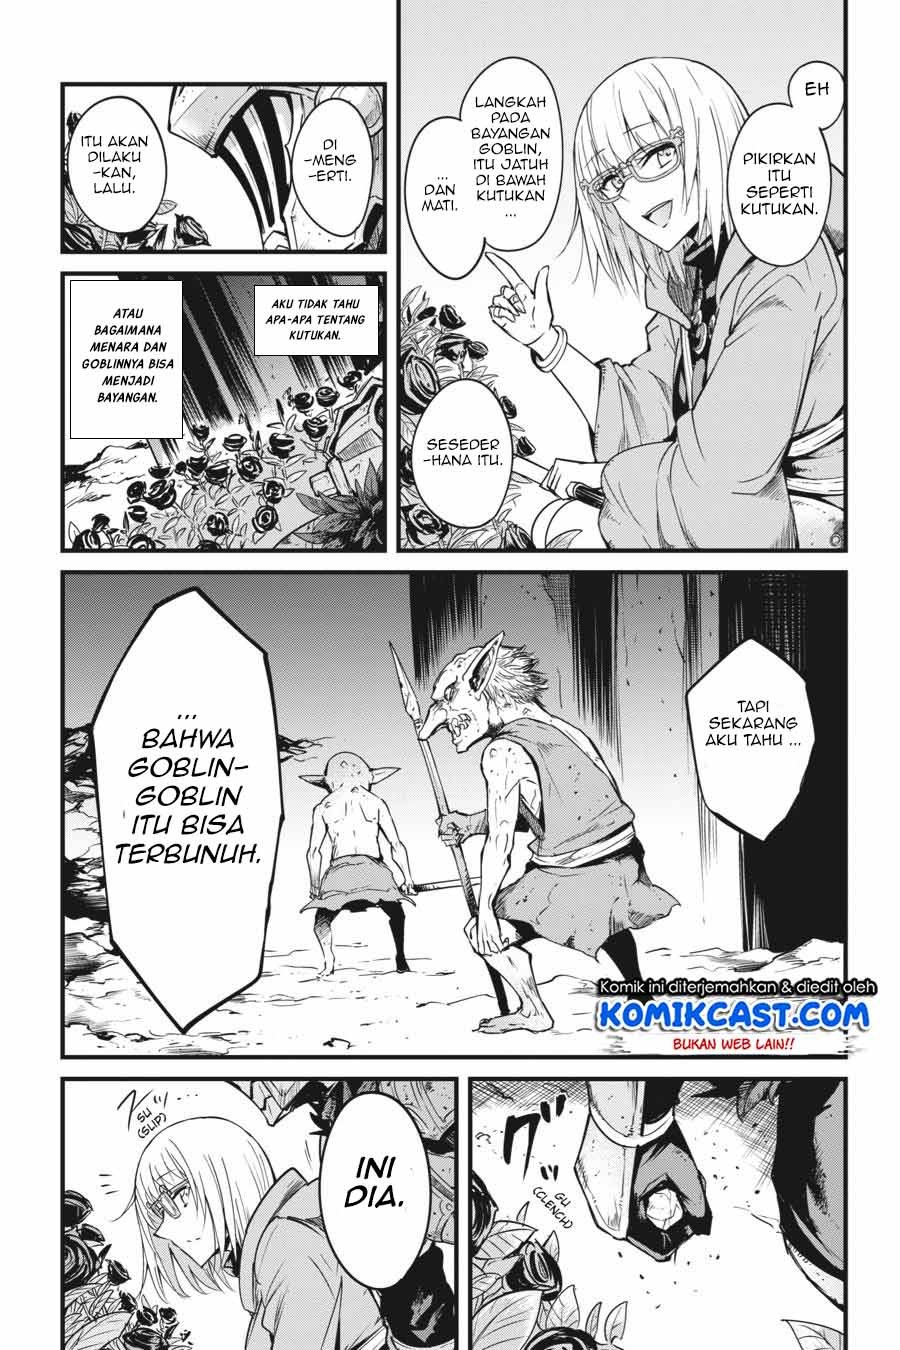 Goblin Slayer: Side Story Year One Chapter 38